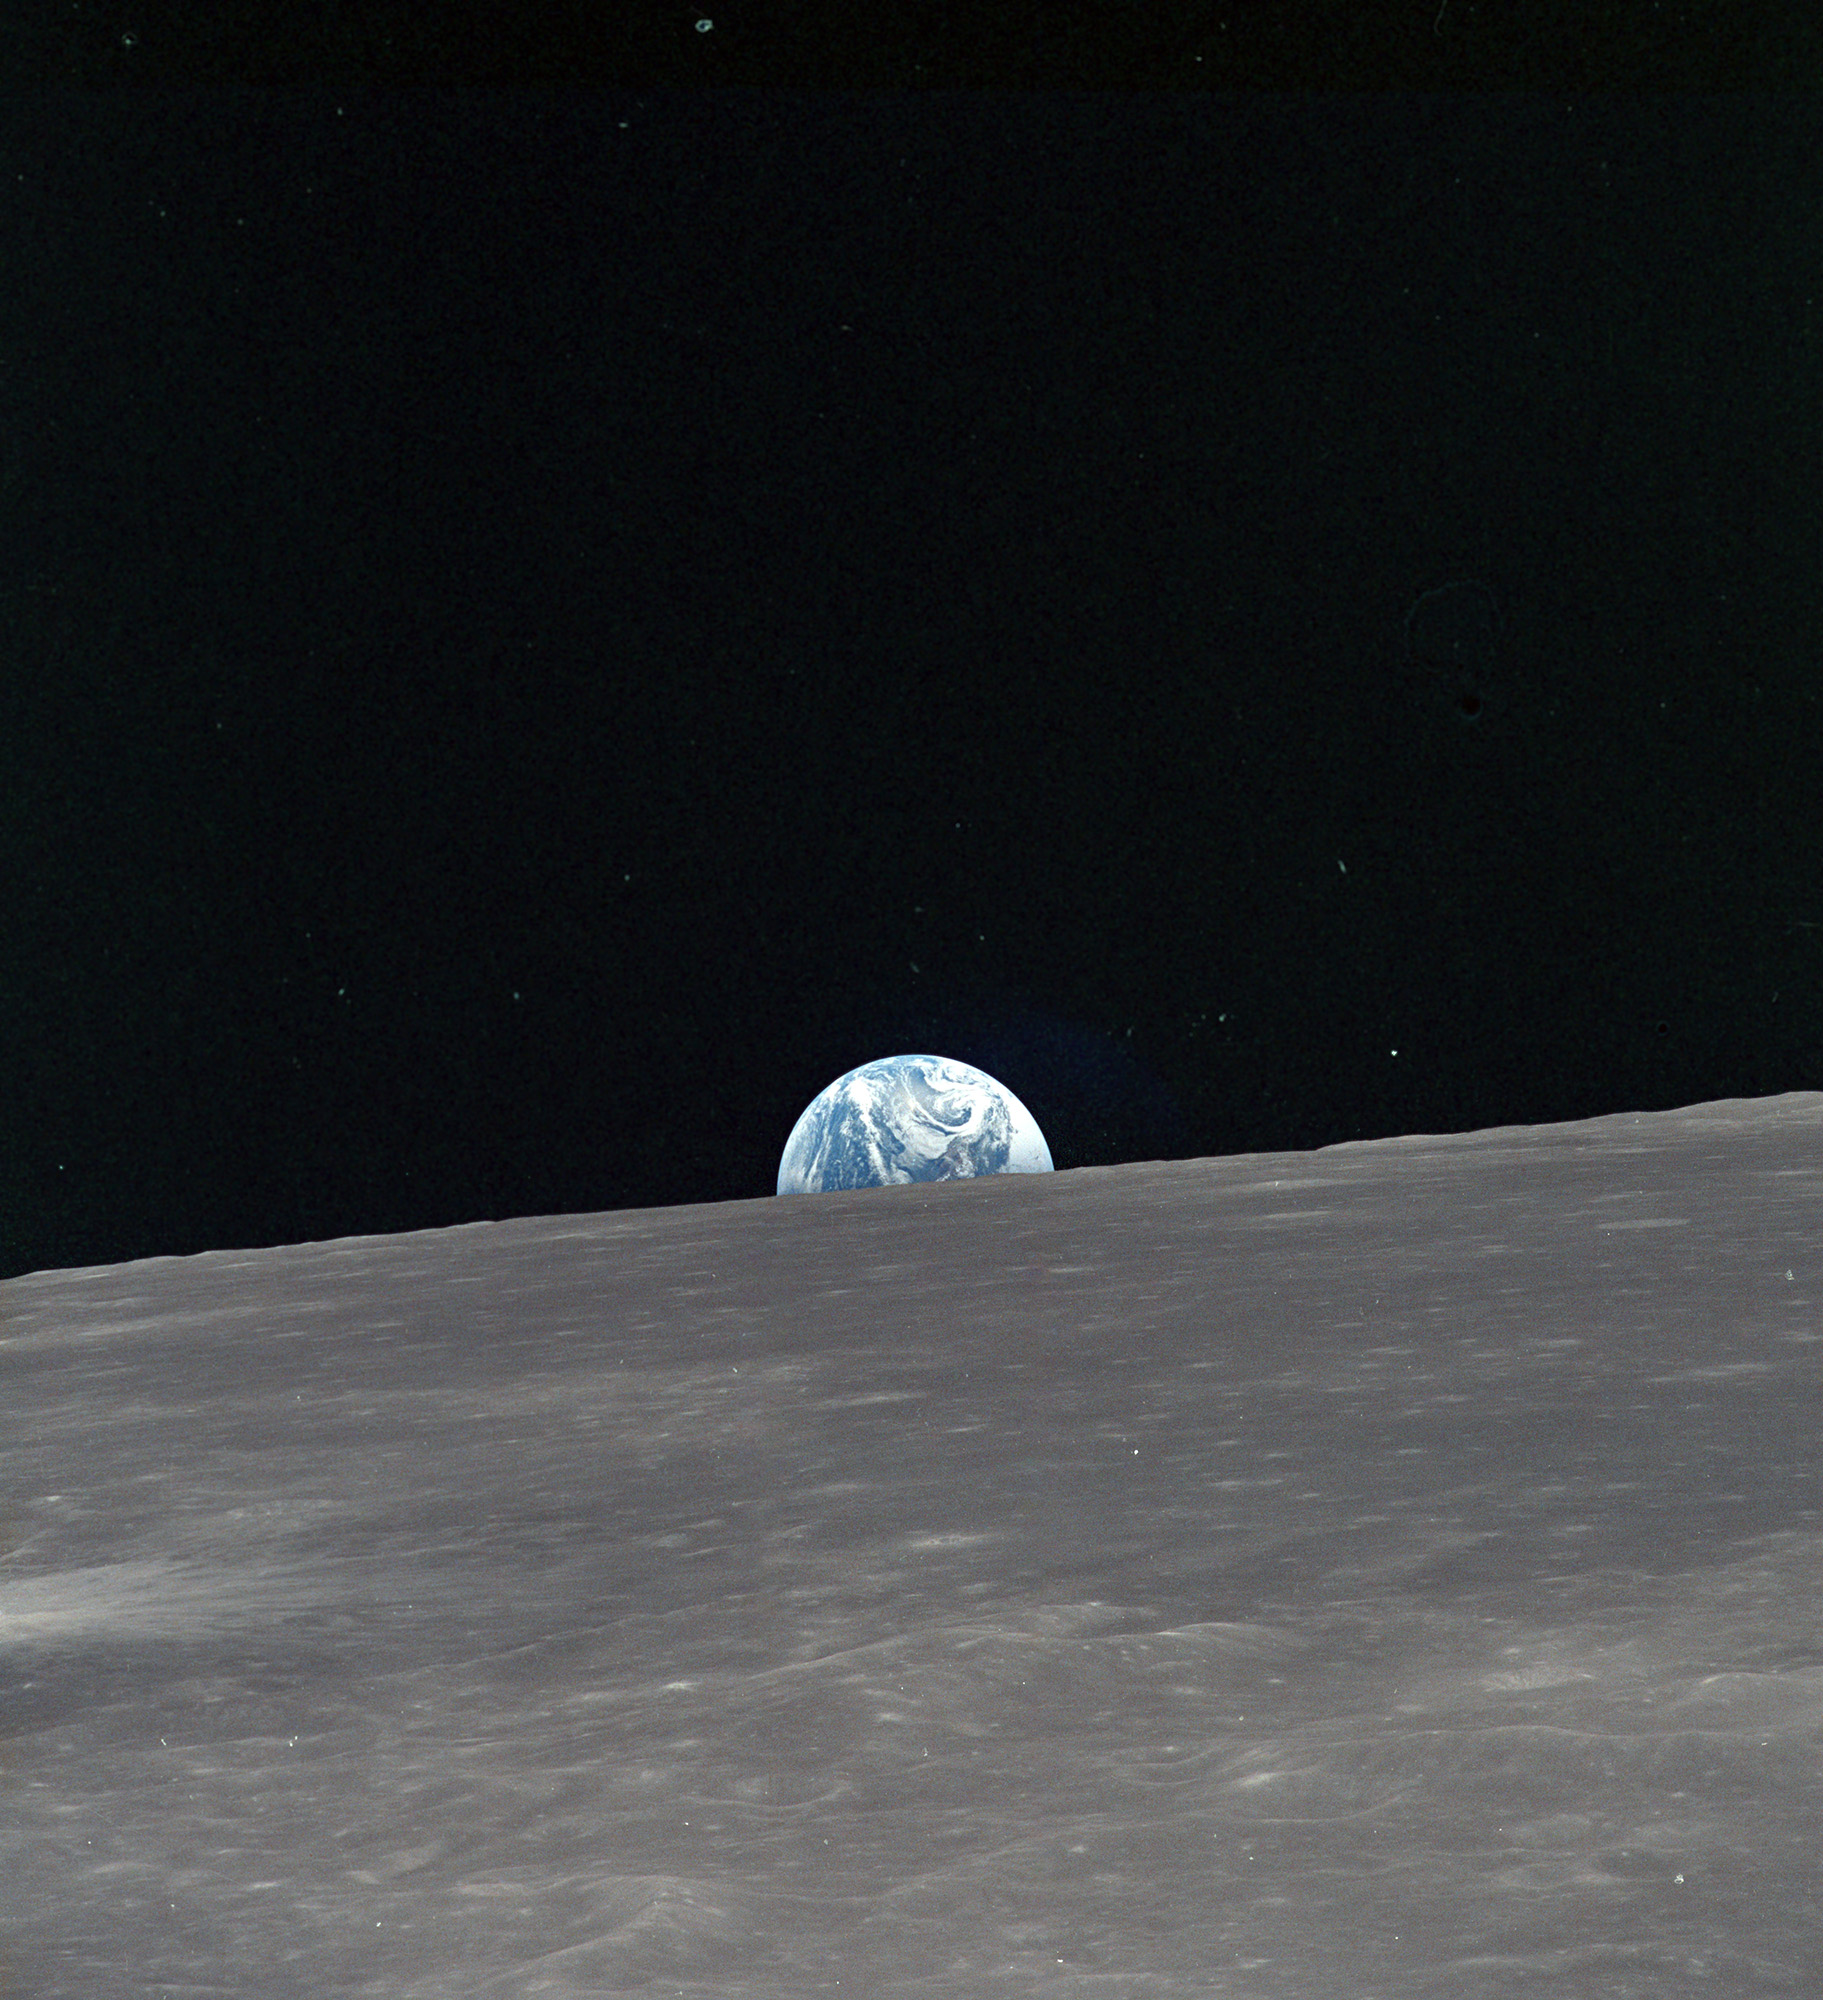 earthrise-as-viewed-from-apollo-10.jpg